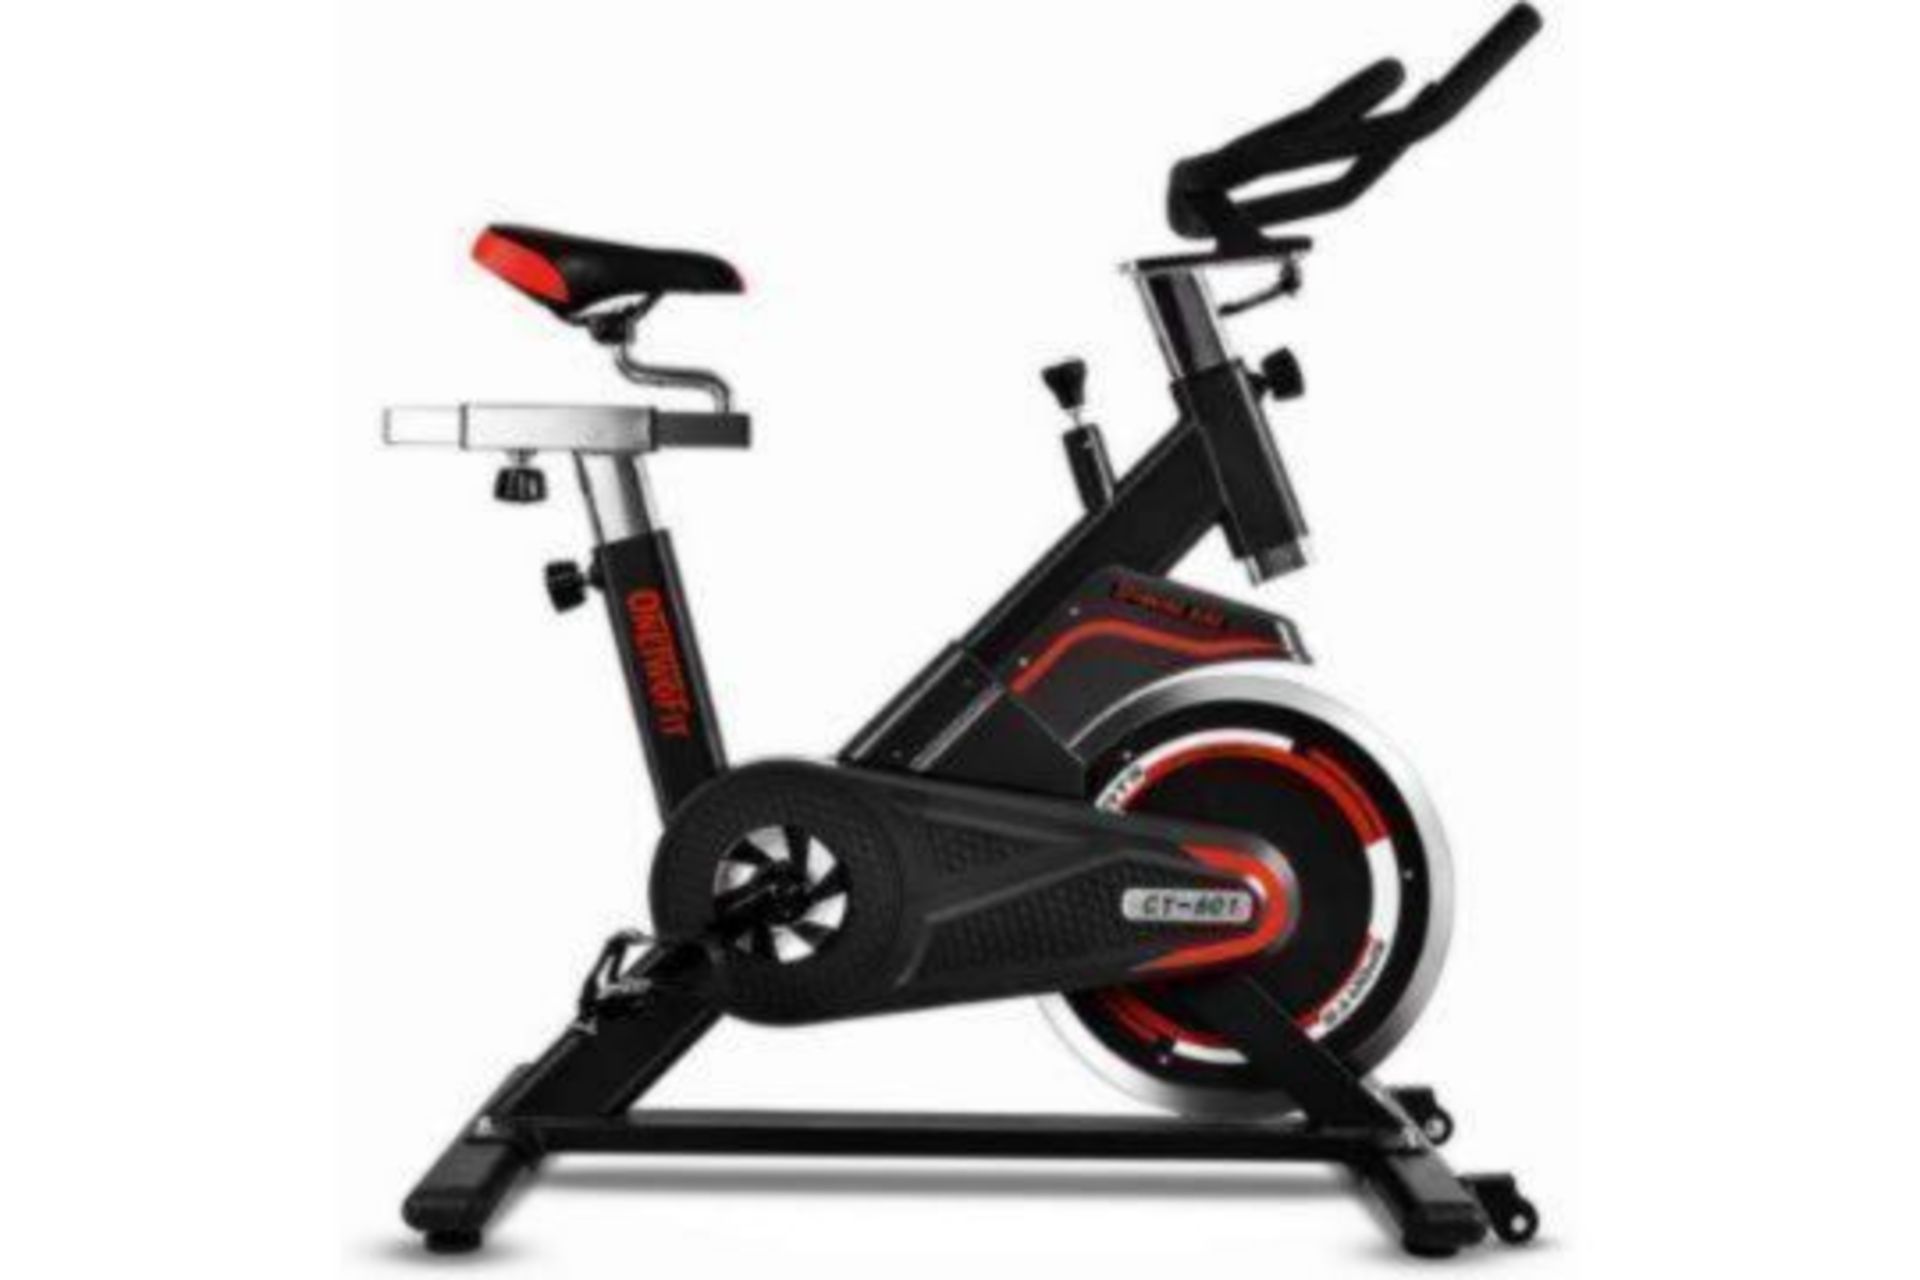 PALLET TO CONTAIN 5 X BRAND NEW ONETWOFIT EXERCISE BIKE, INDOOR CYCLING BIKE WITH 44LBS FLYWHEEL,